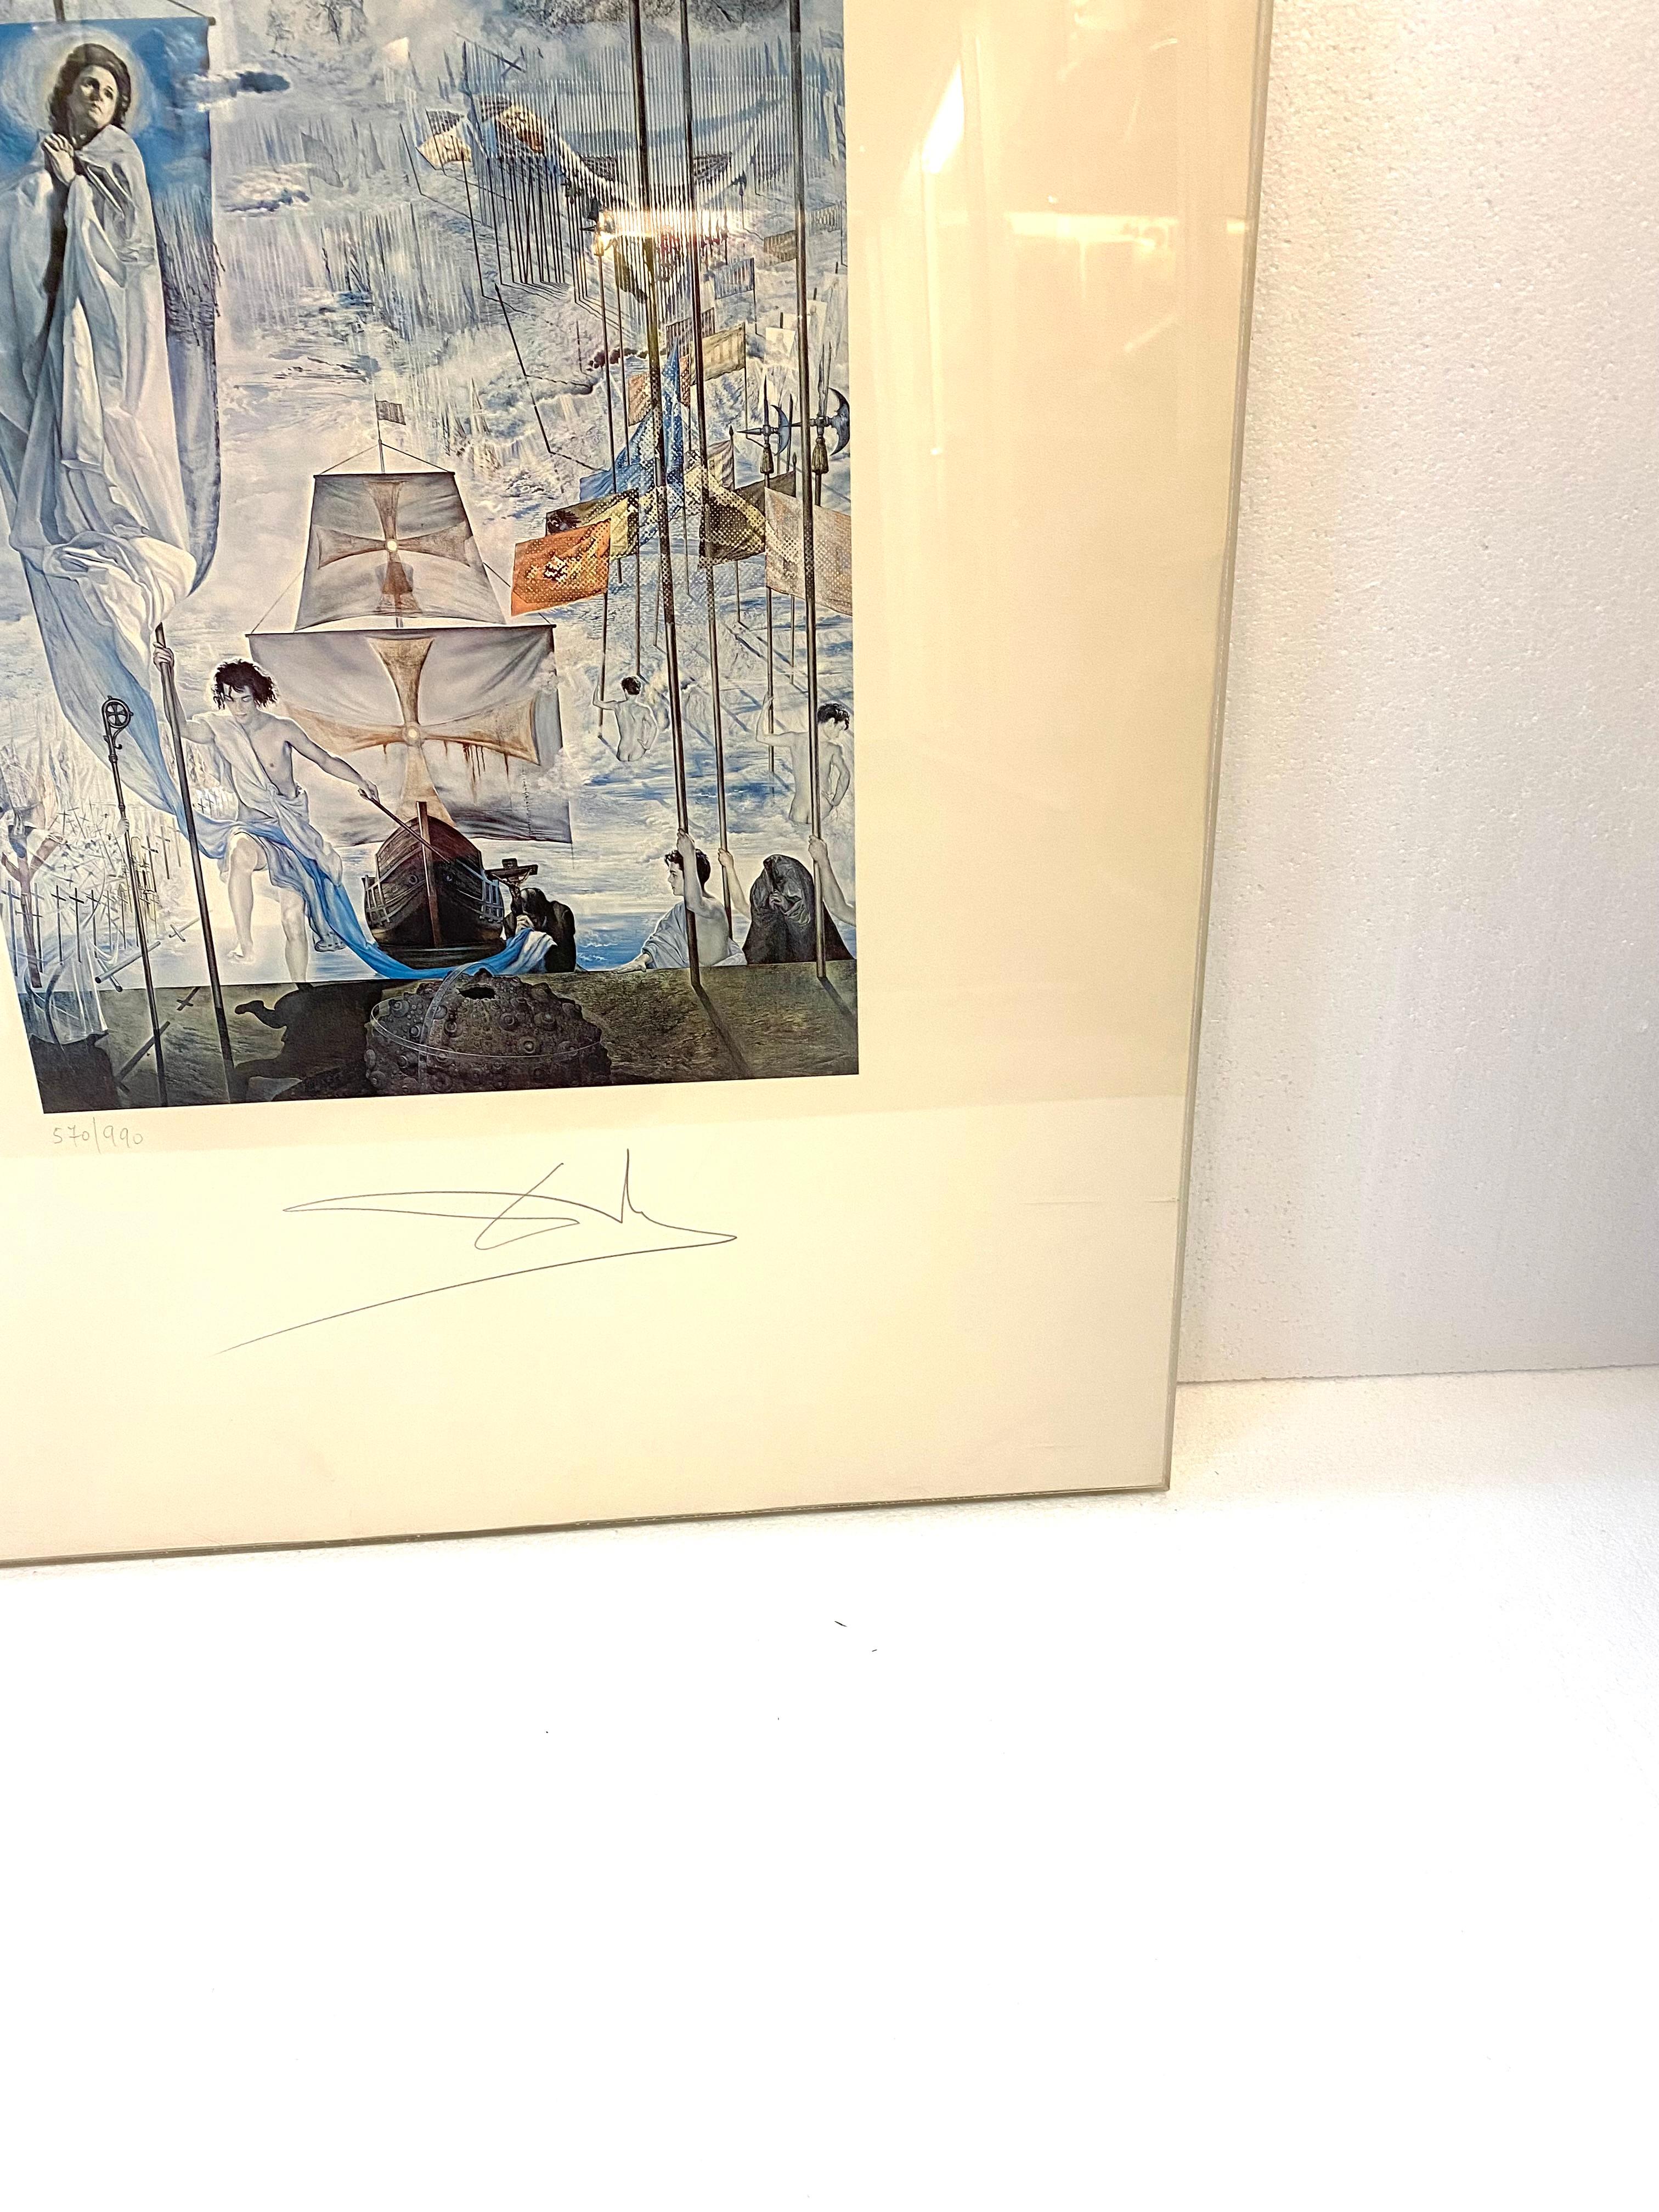 THE DREAM OF COLUMBUS’ SALVADOR DALI ORIGINAL SIGNED LITHOGRAPH LIMITED EDITION - Modern Print by (after) Salvador Dali